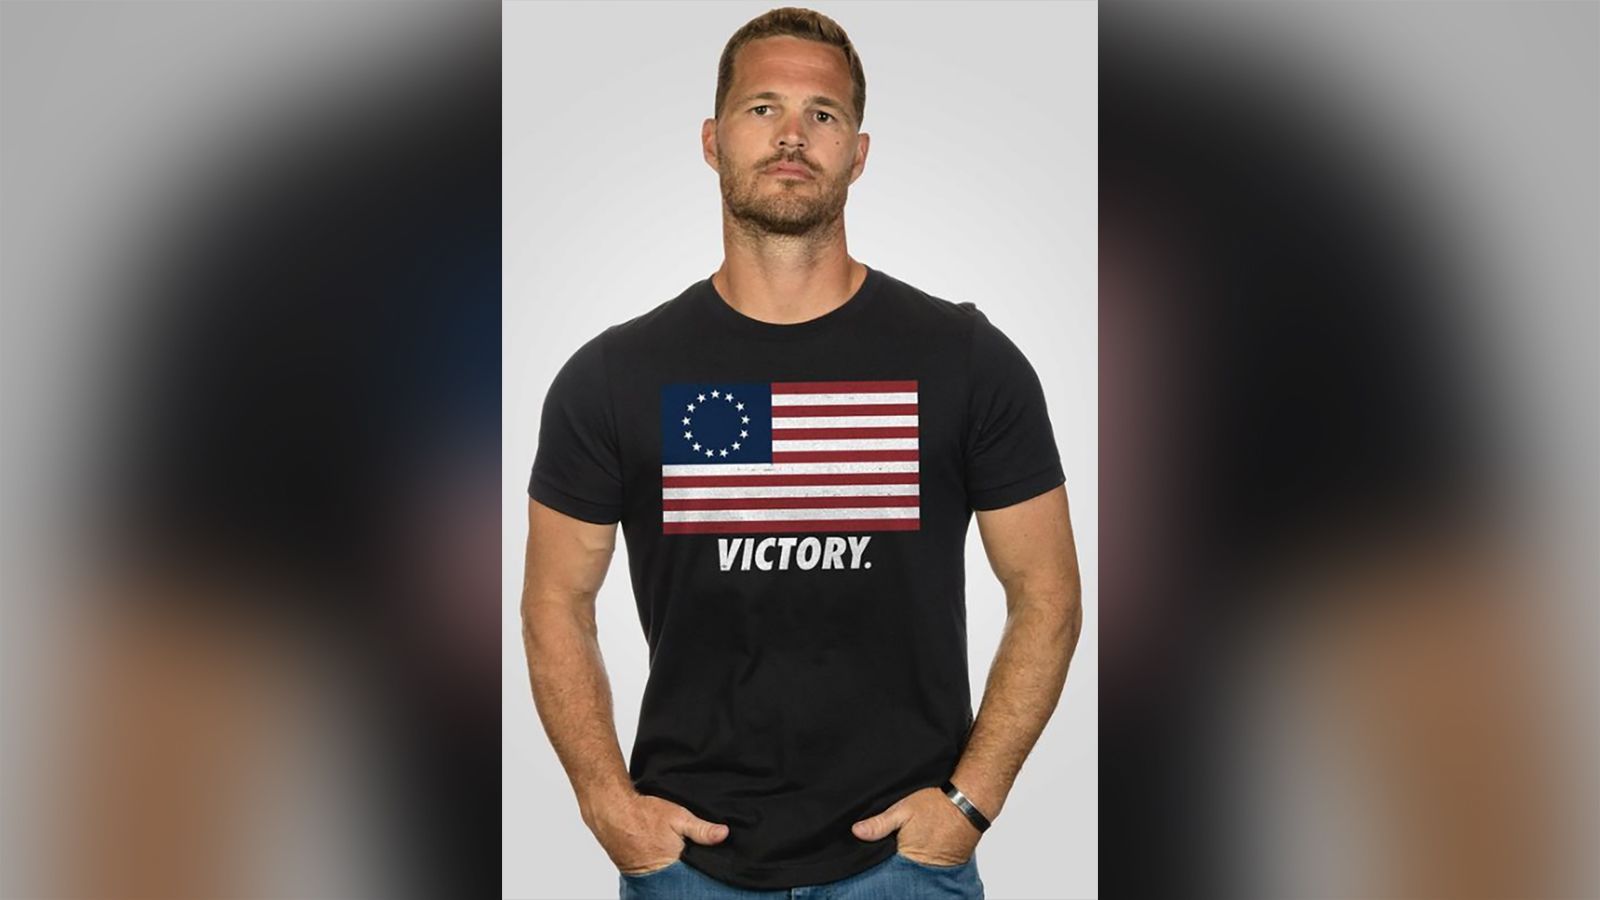 A veteran-owned company releases a Betsy Ross flag shirt after Nike controversy |